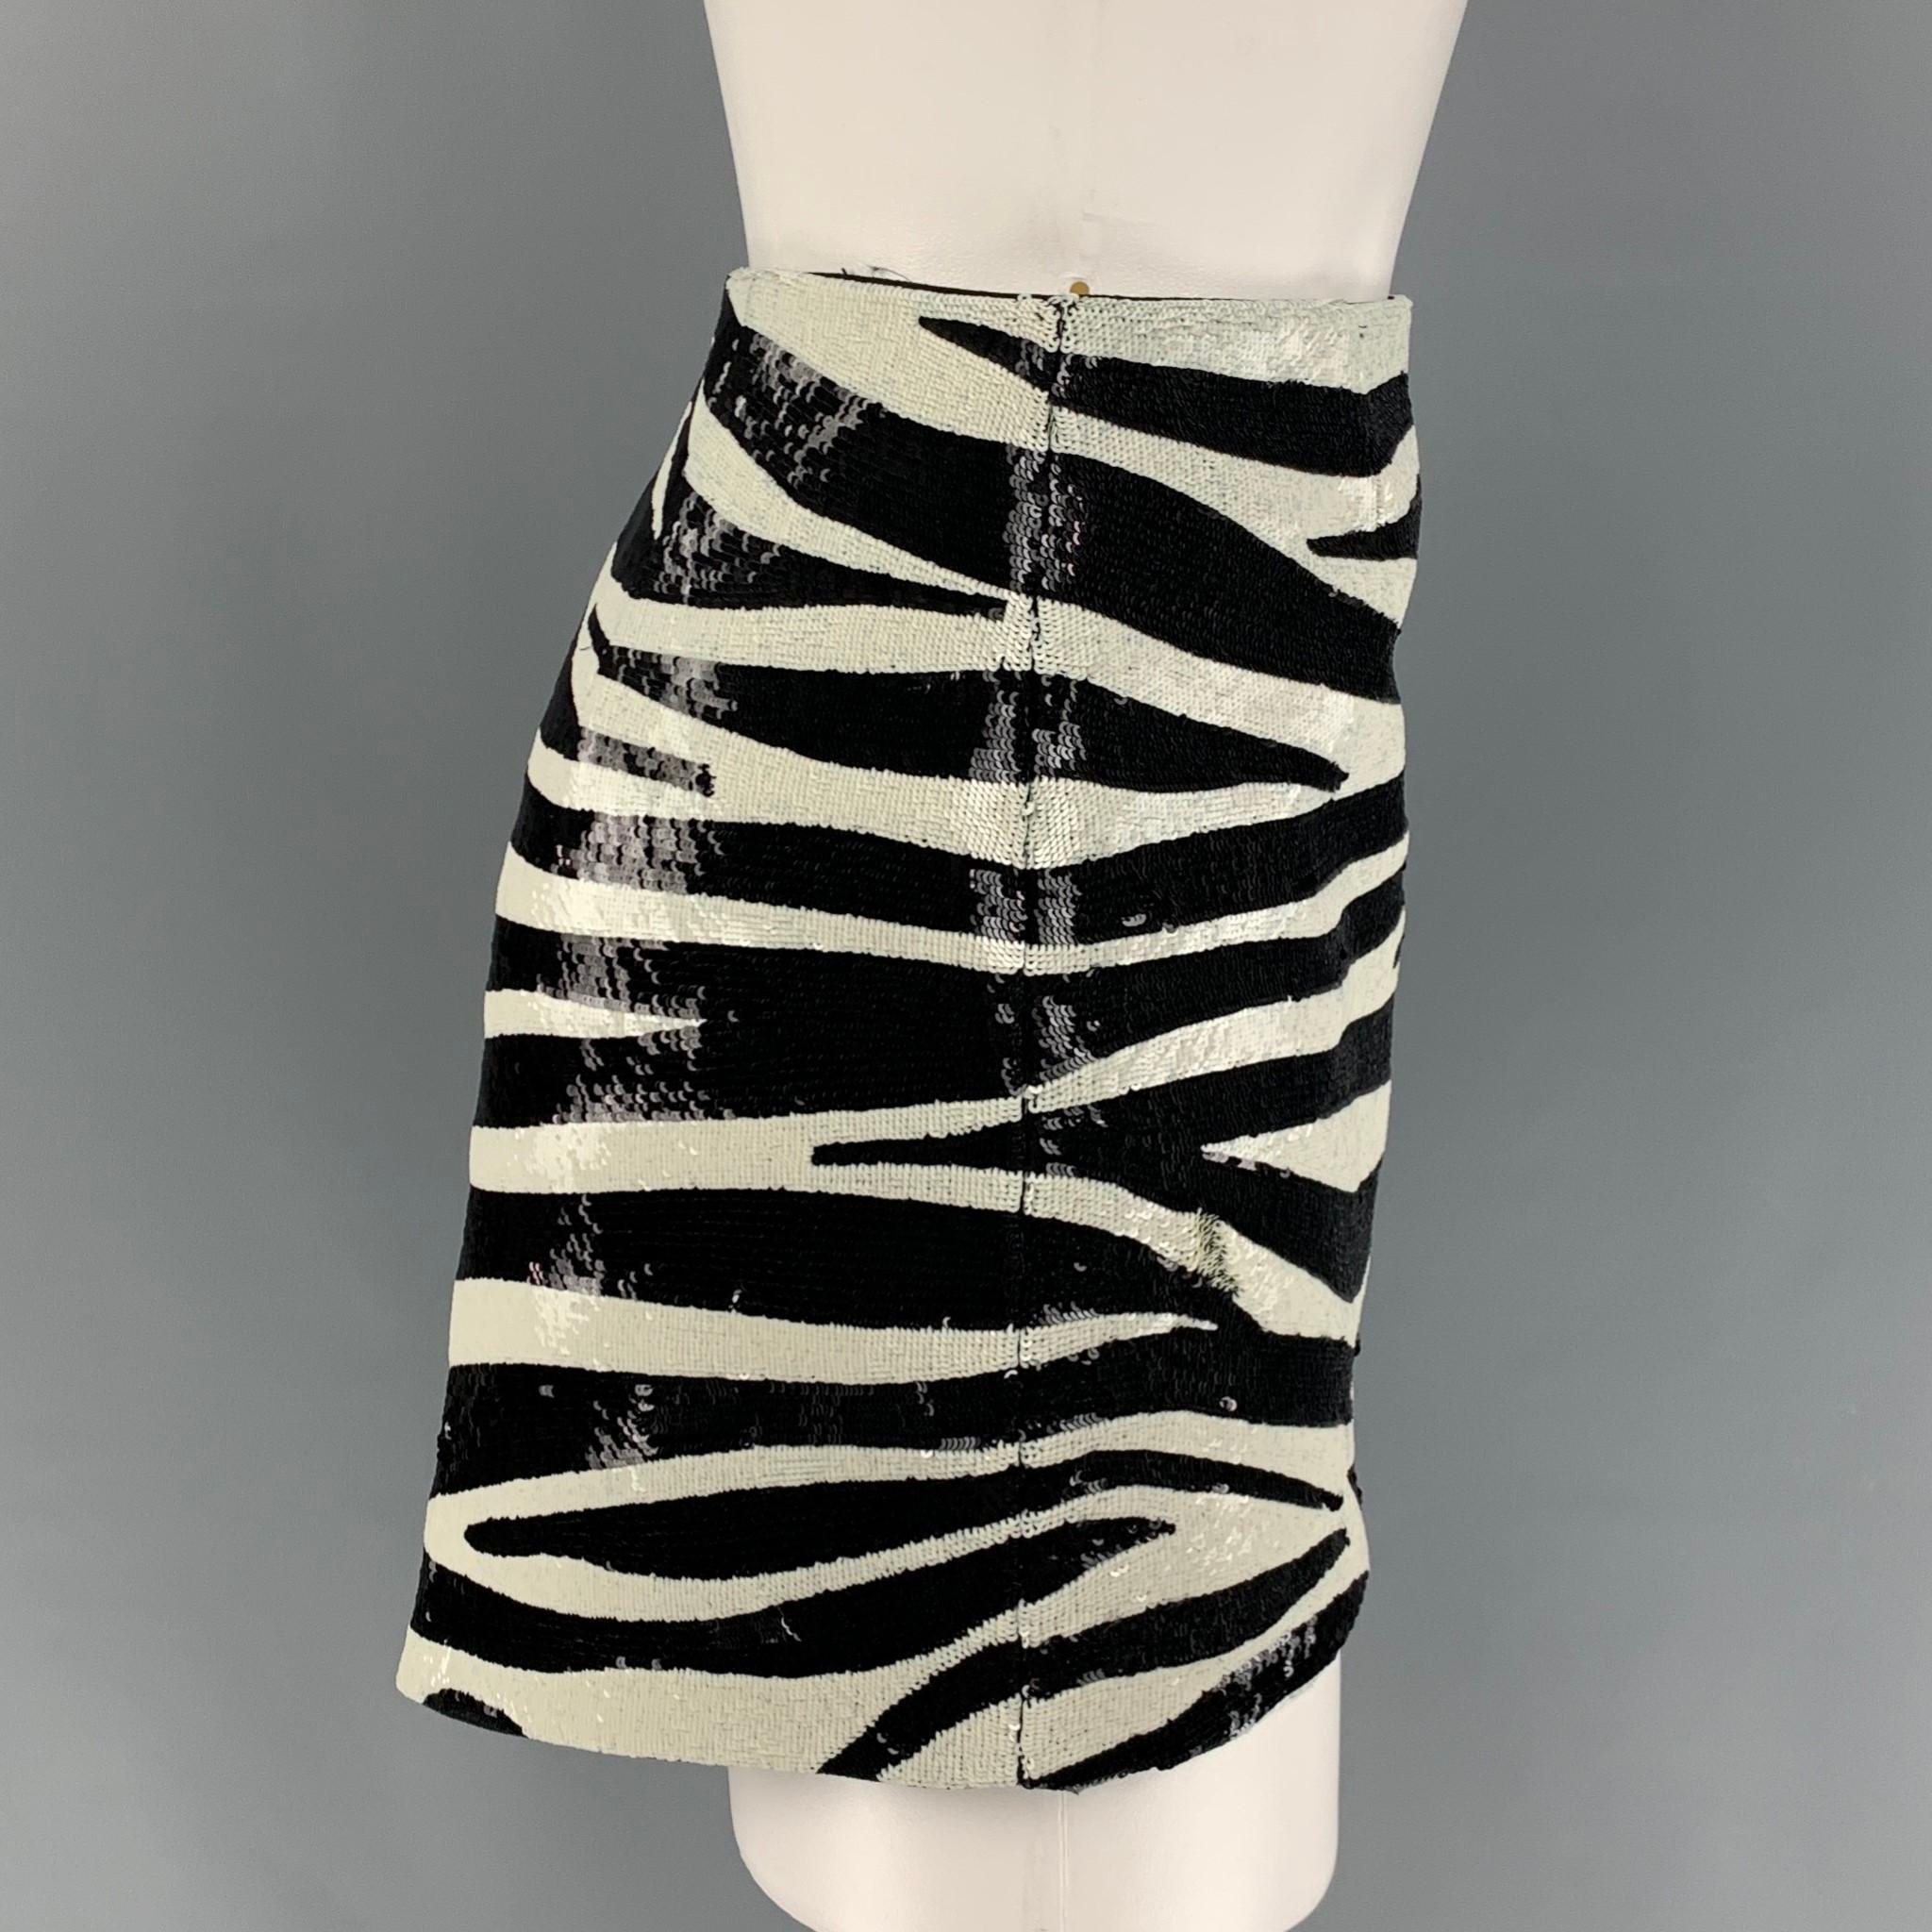 SAINT LAURENT mini skirt comes in a black & white zebra print acetate / viscose featuring an asymmetrical hem and a hidden zip up closure. Made in Italy. 

Excellent Pre-Owned Condition.
Marked: F 38
Original Retail Price: